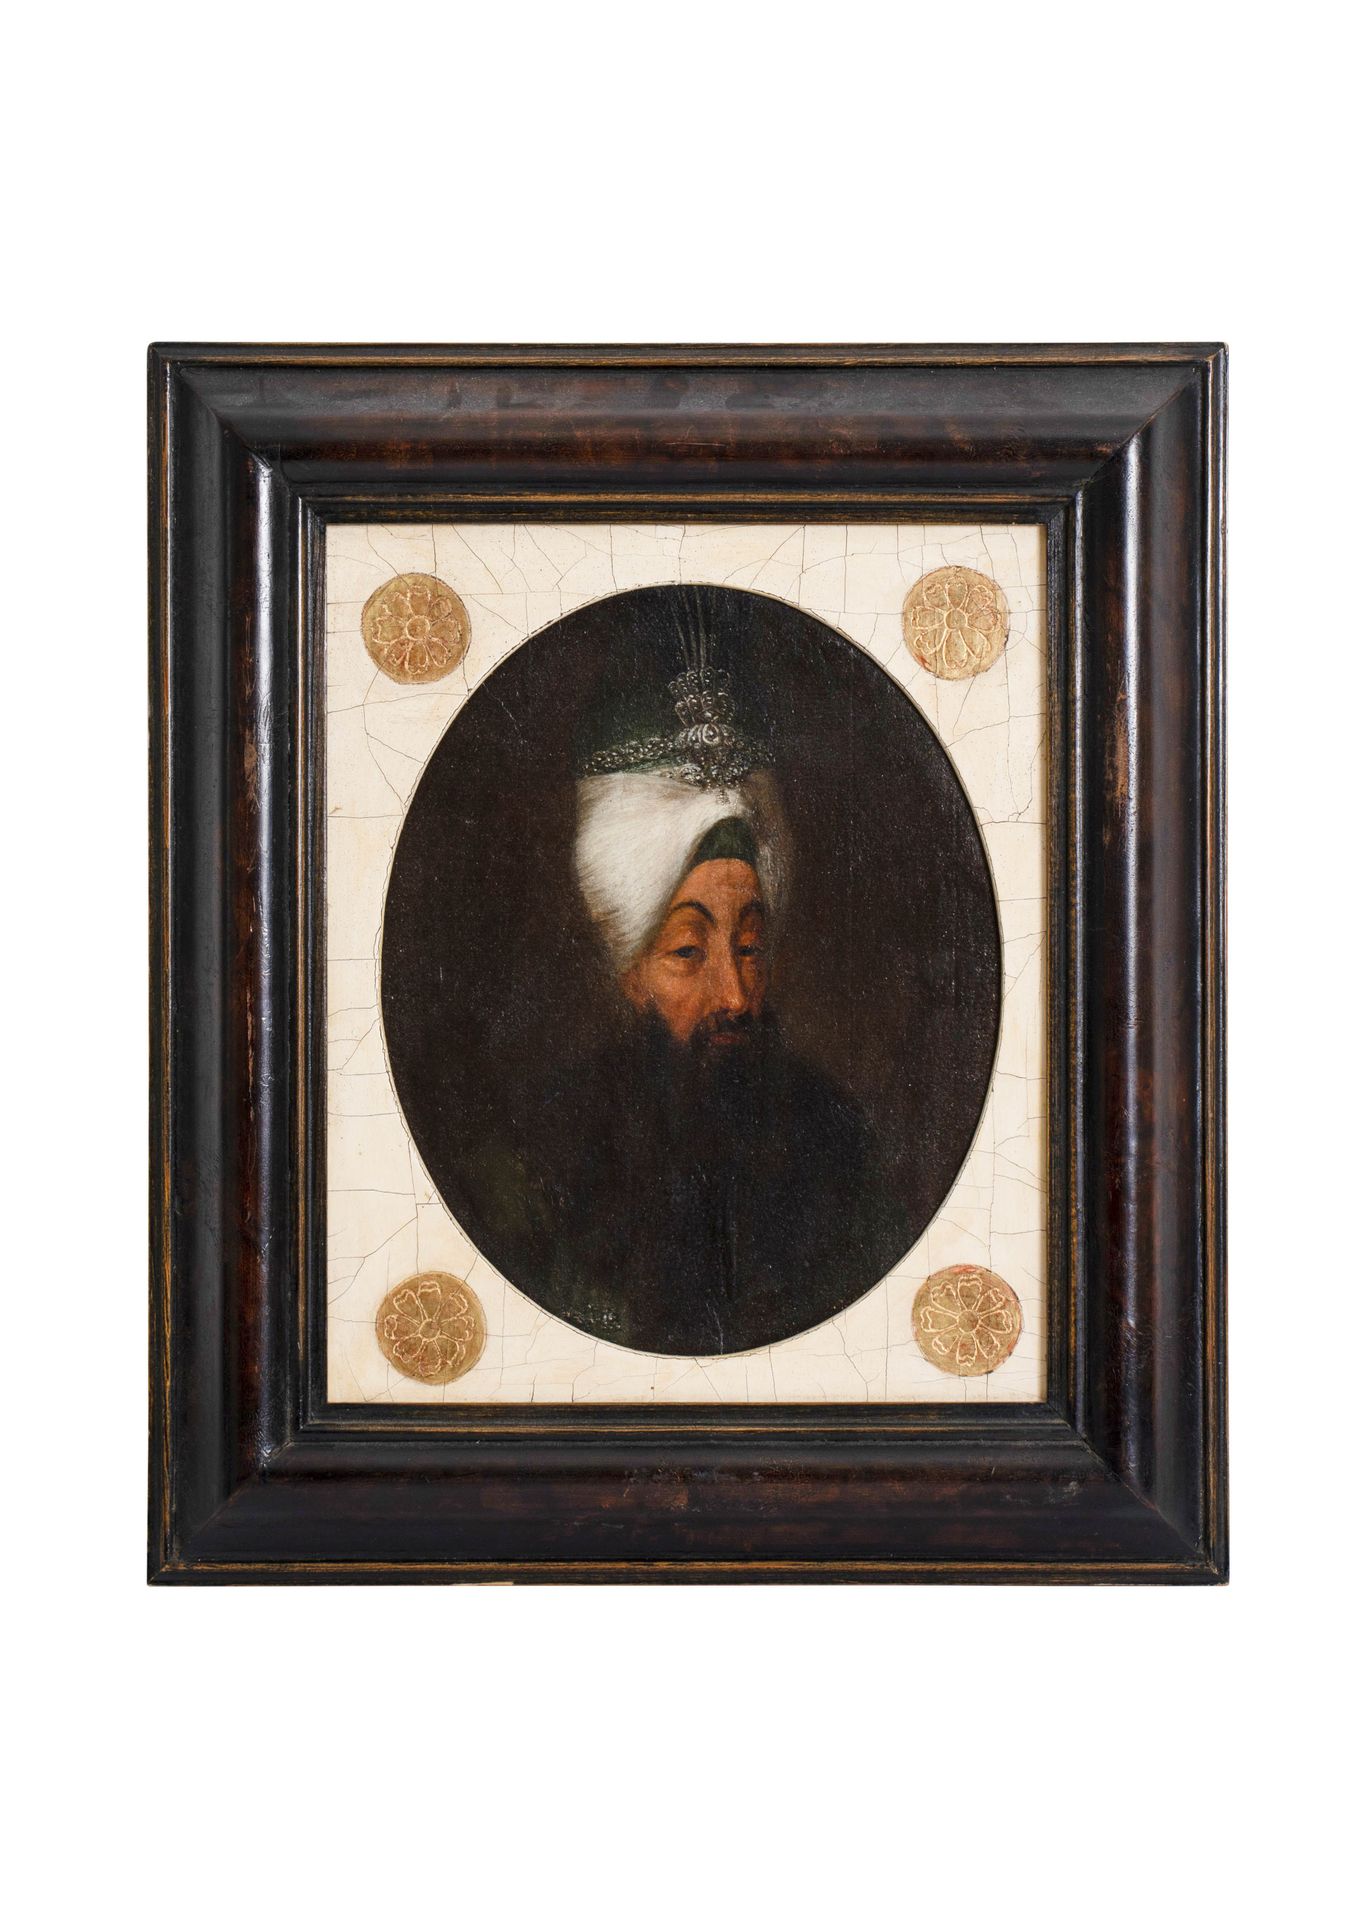 AN IMPORTANT OTTOMAN OIL PAINTING OF SULTAN ABDULHAMID I, 18TH CENTURY AN IMPORT&hellip;